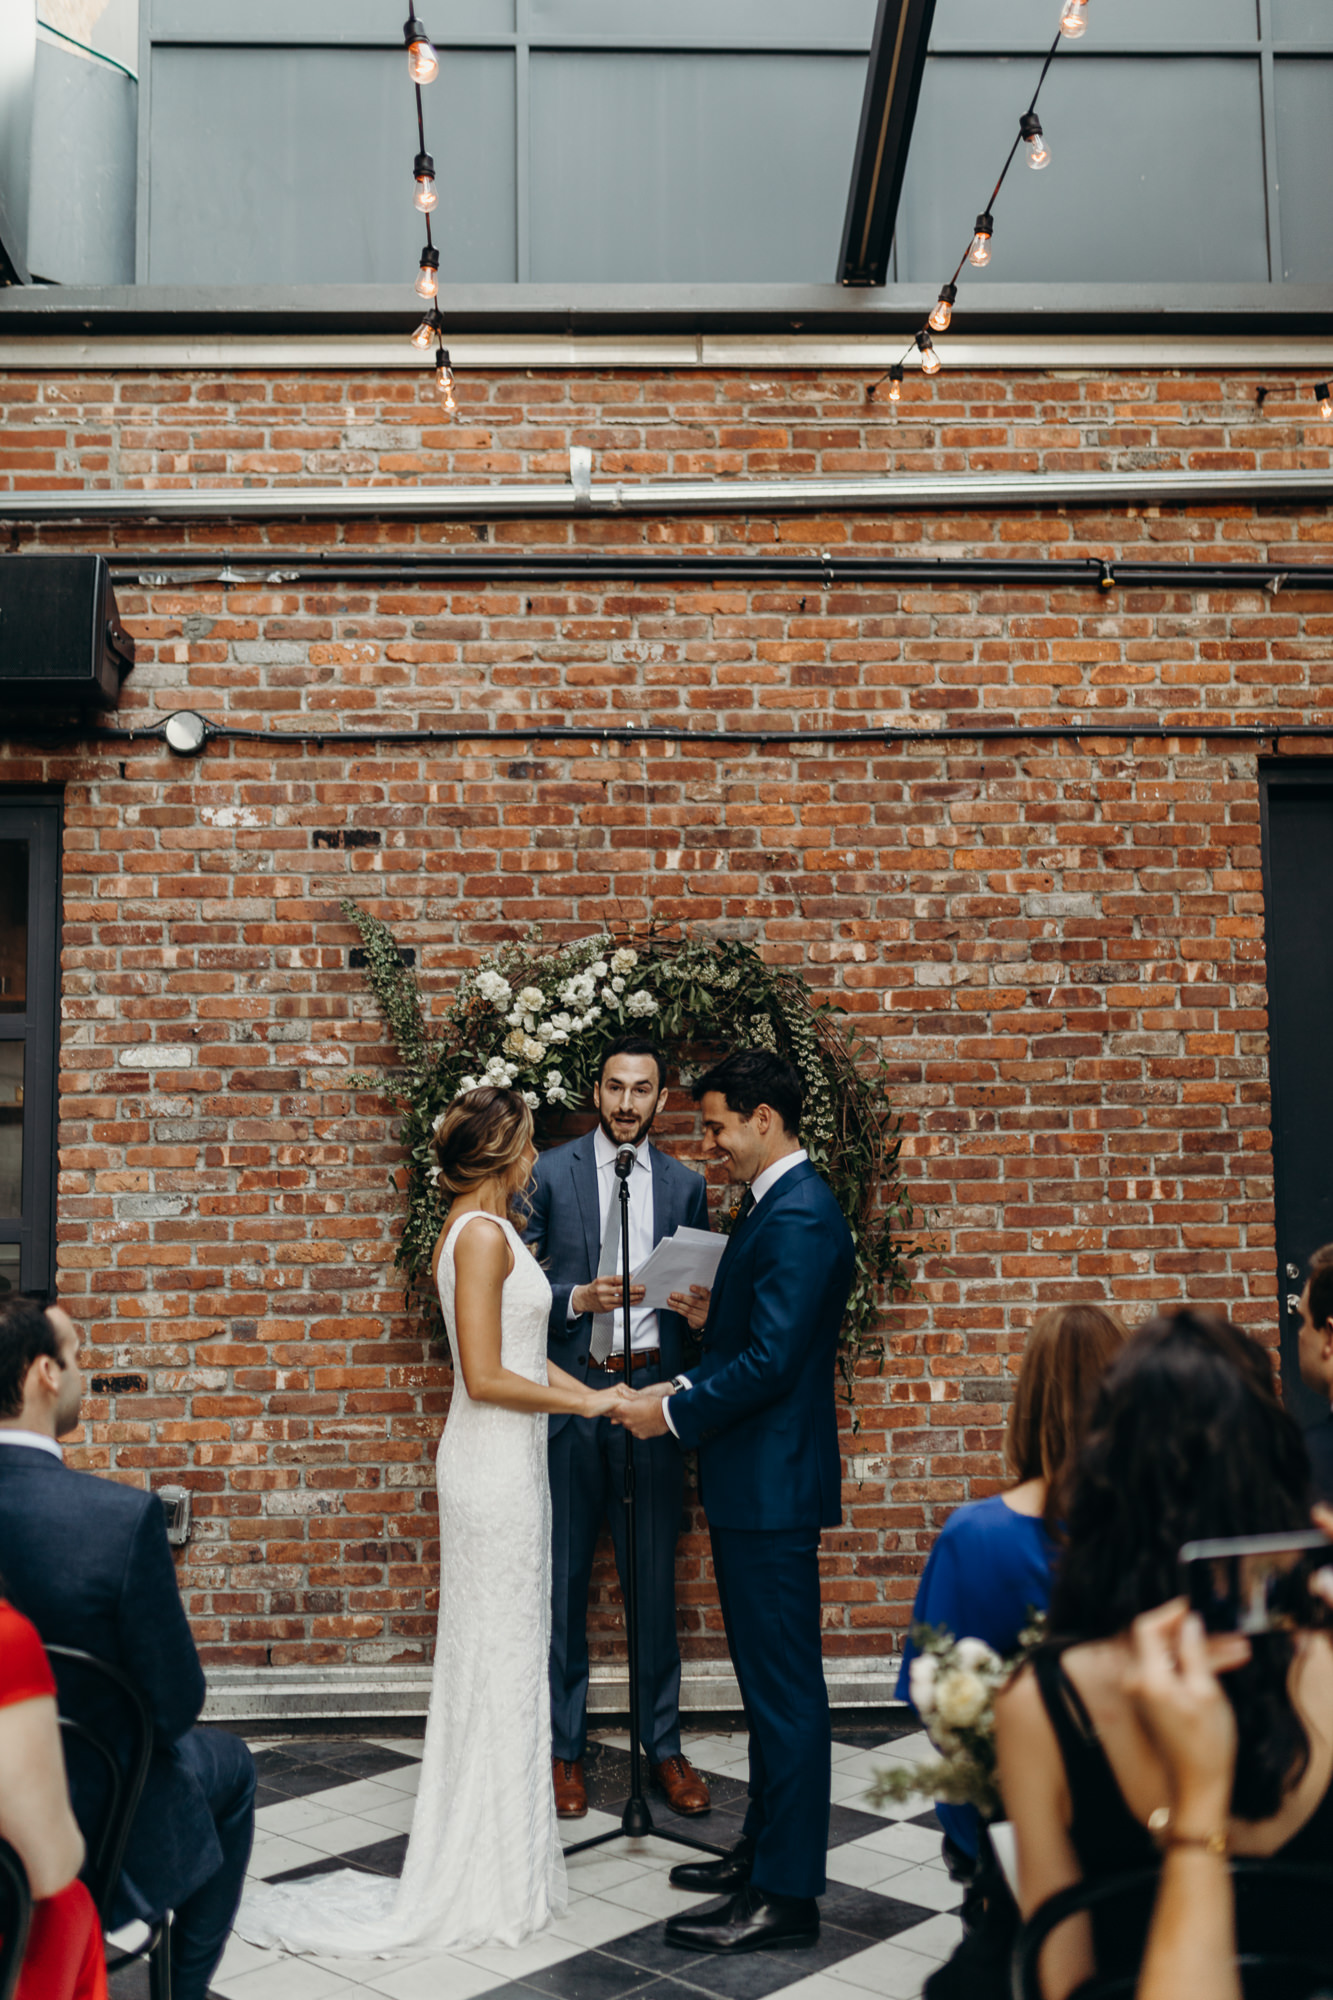 a wedding ceremony at the wythe hotel in brooklyn, new york city